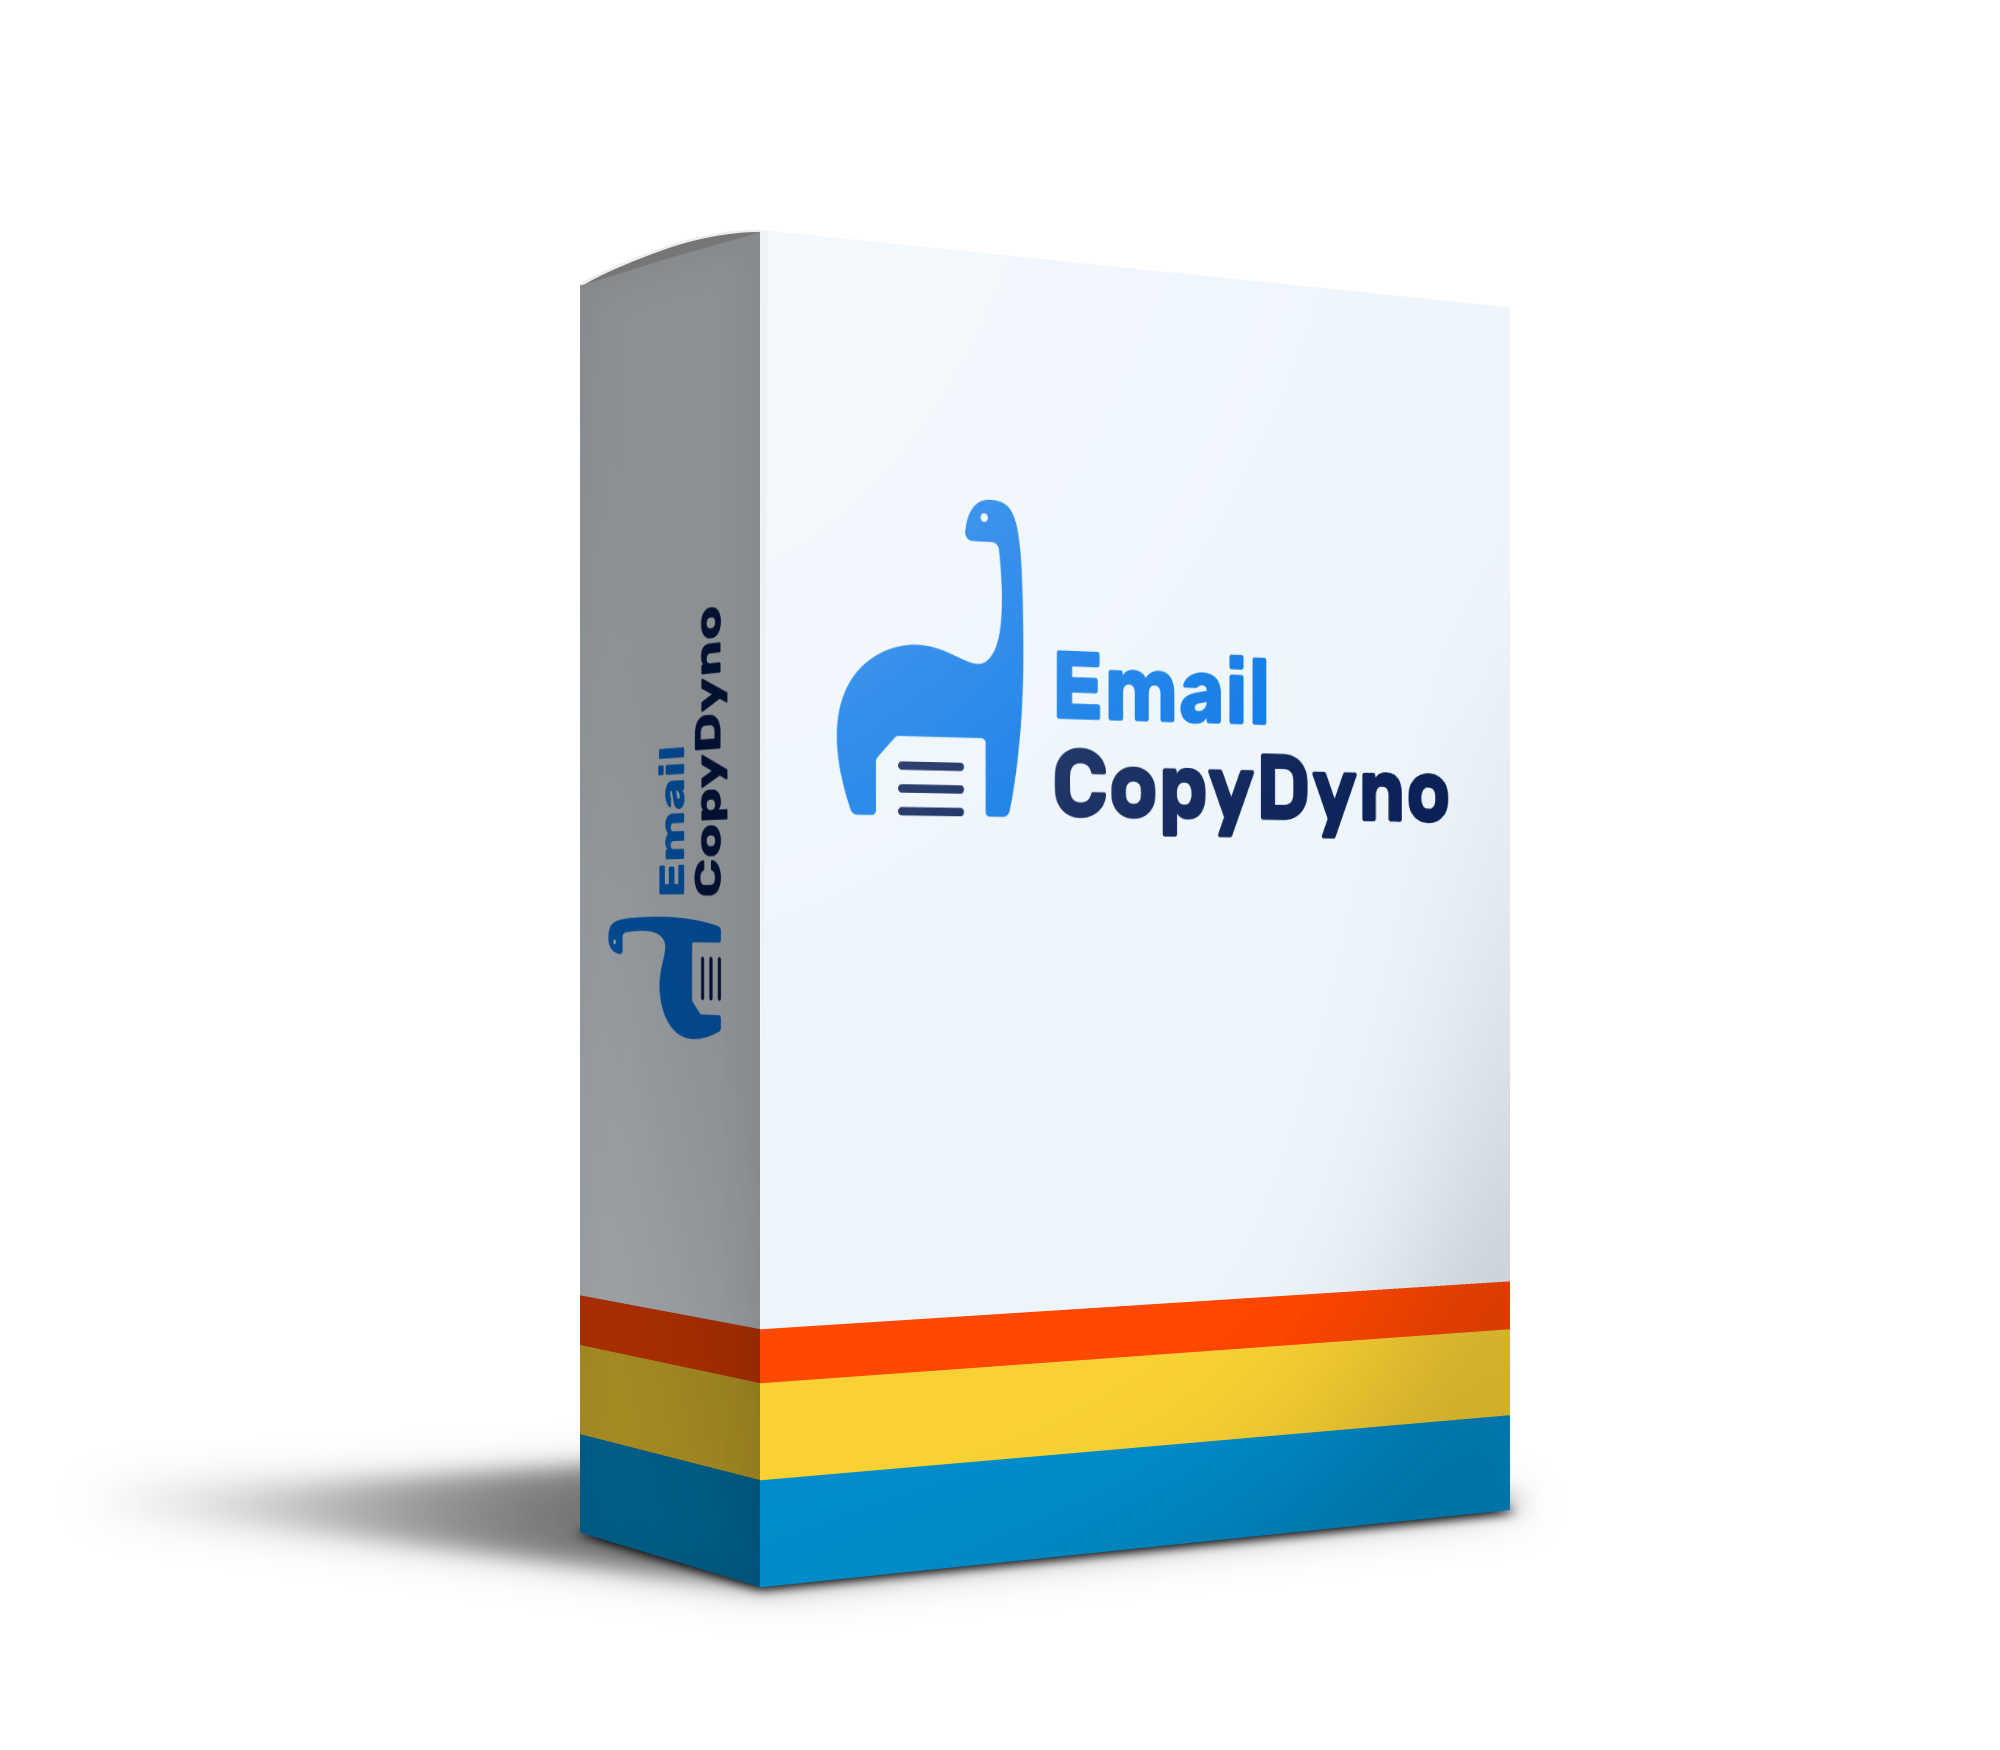 Email copywriting software by Patrick Enyum and Neil Napier